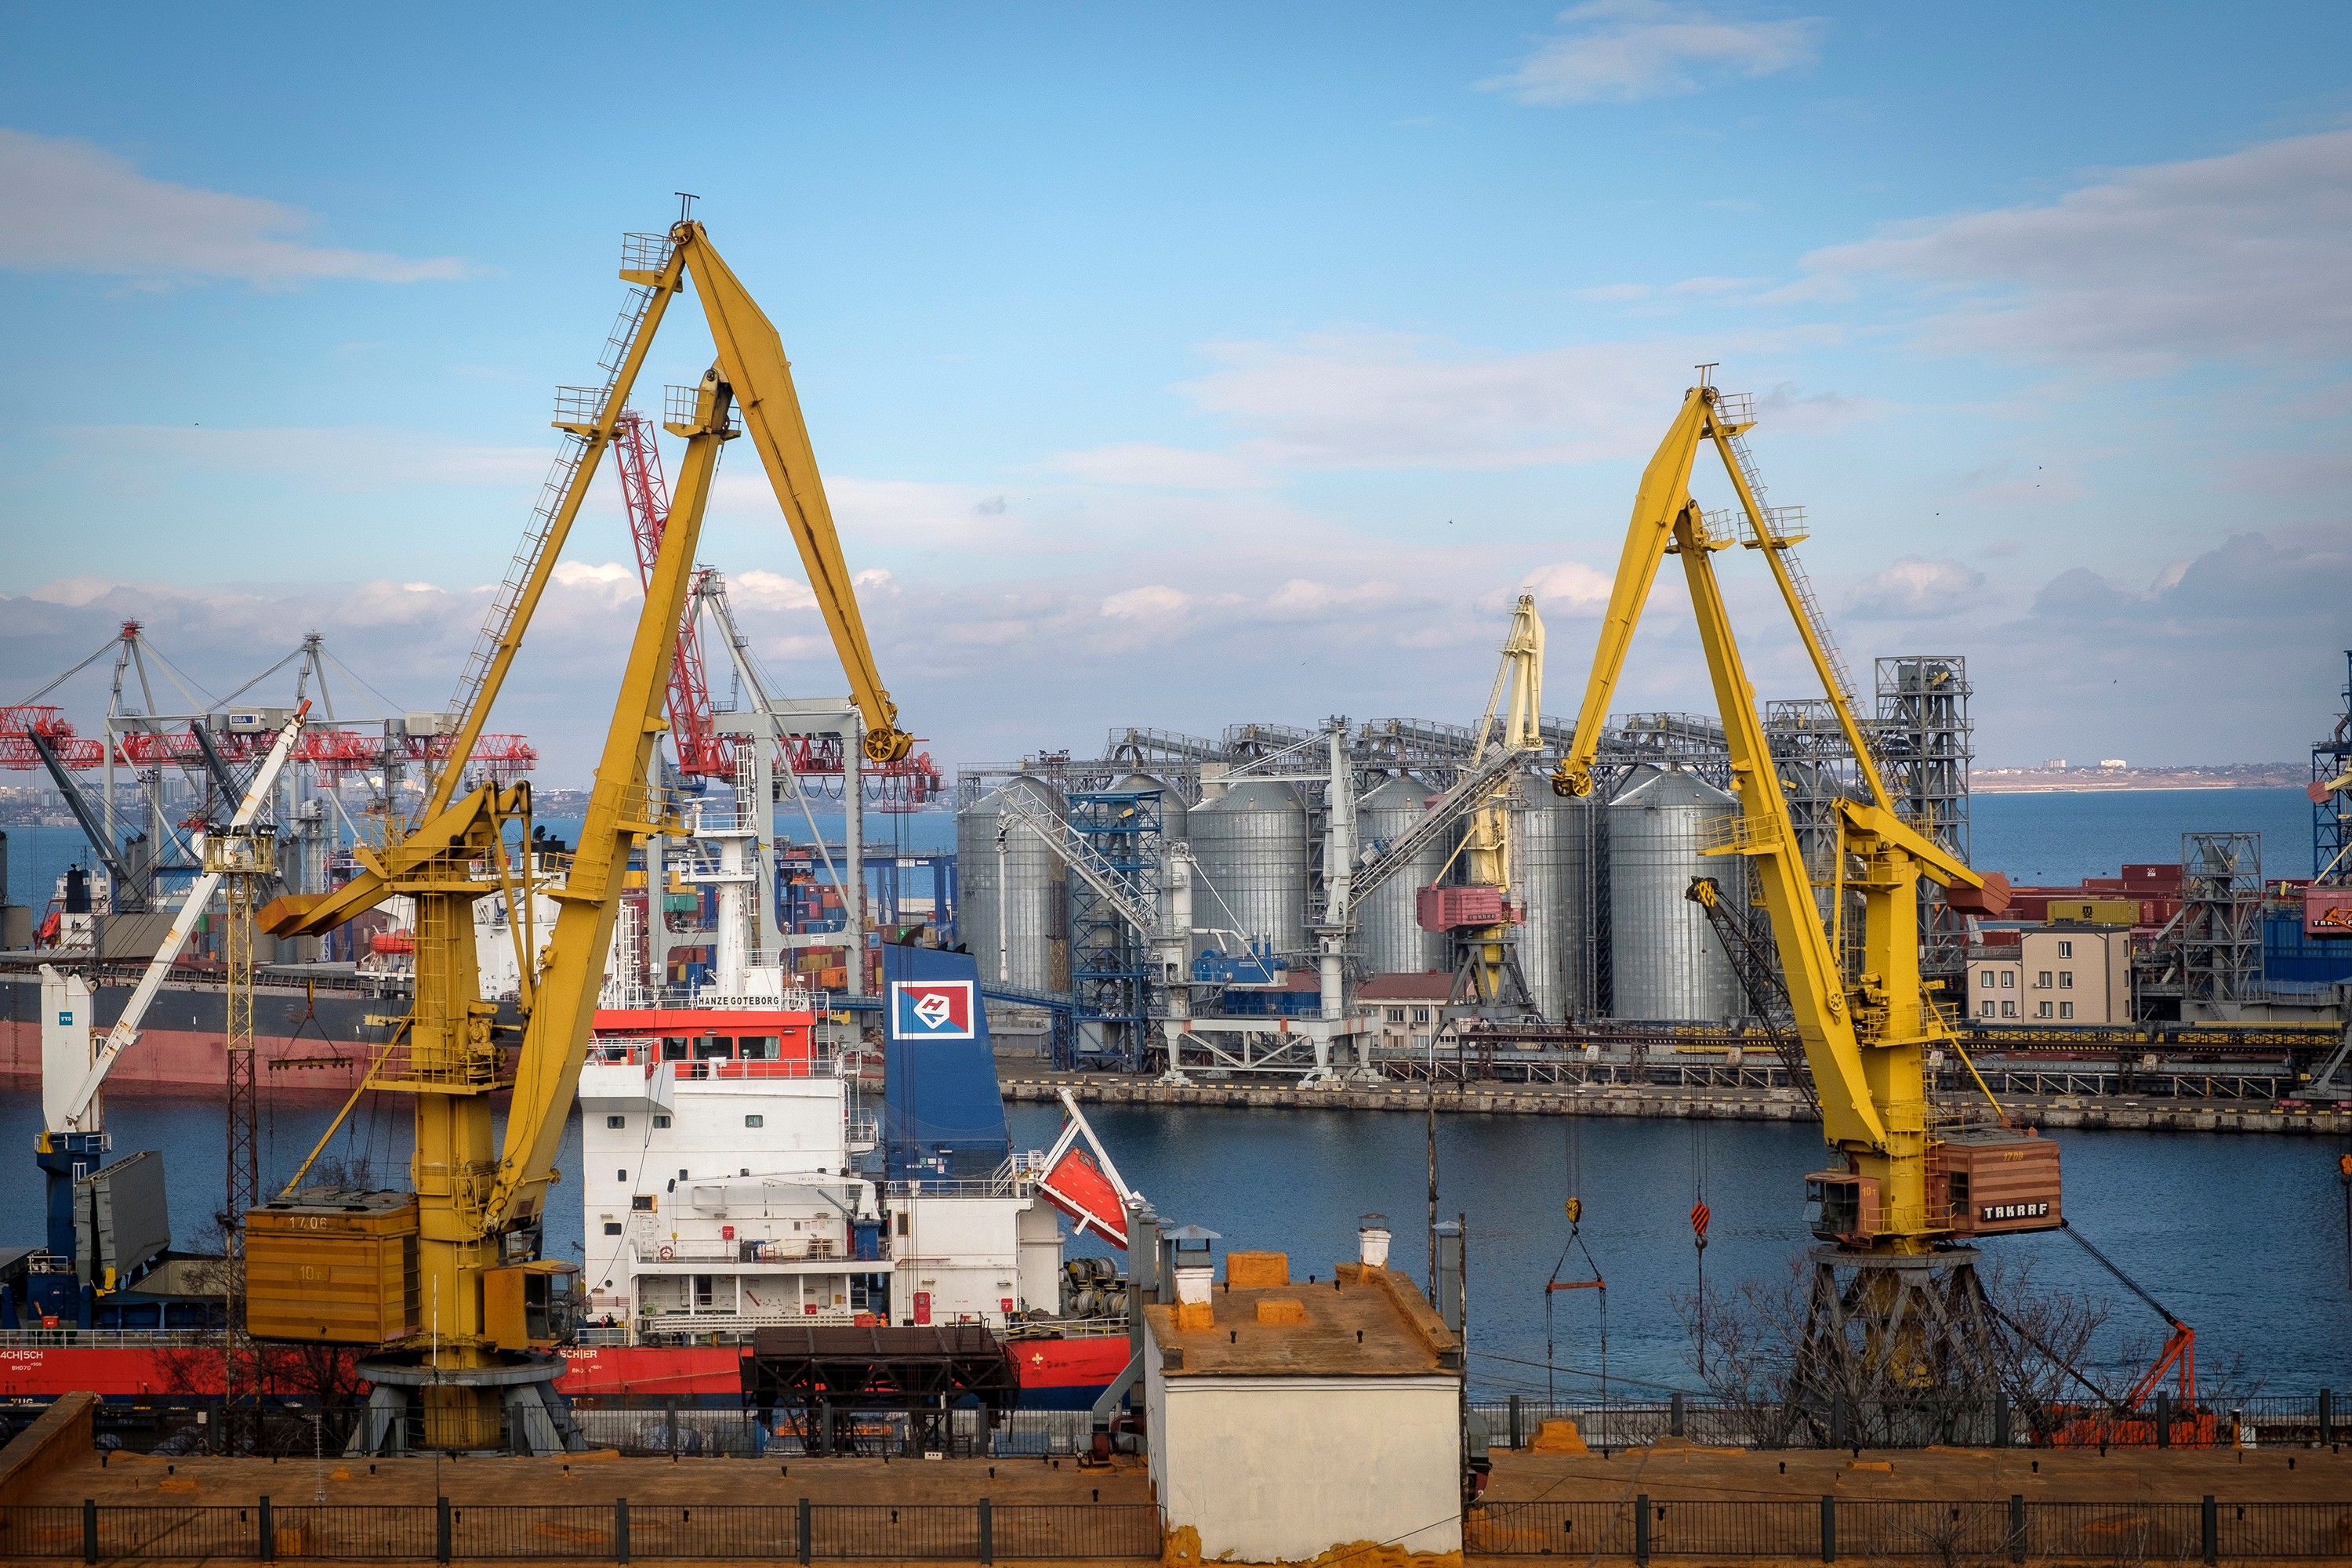 Storage silos and shipping cranes at the Port of Odesa in Ukraine, on January 22. 